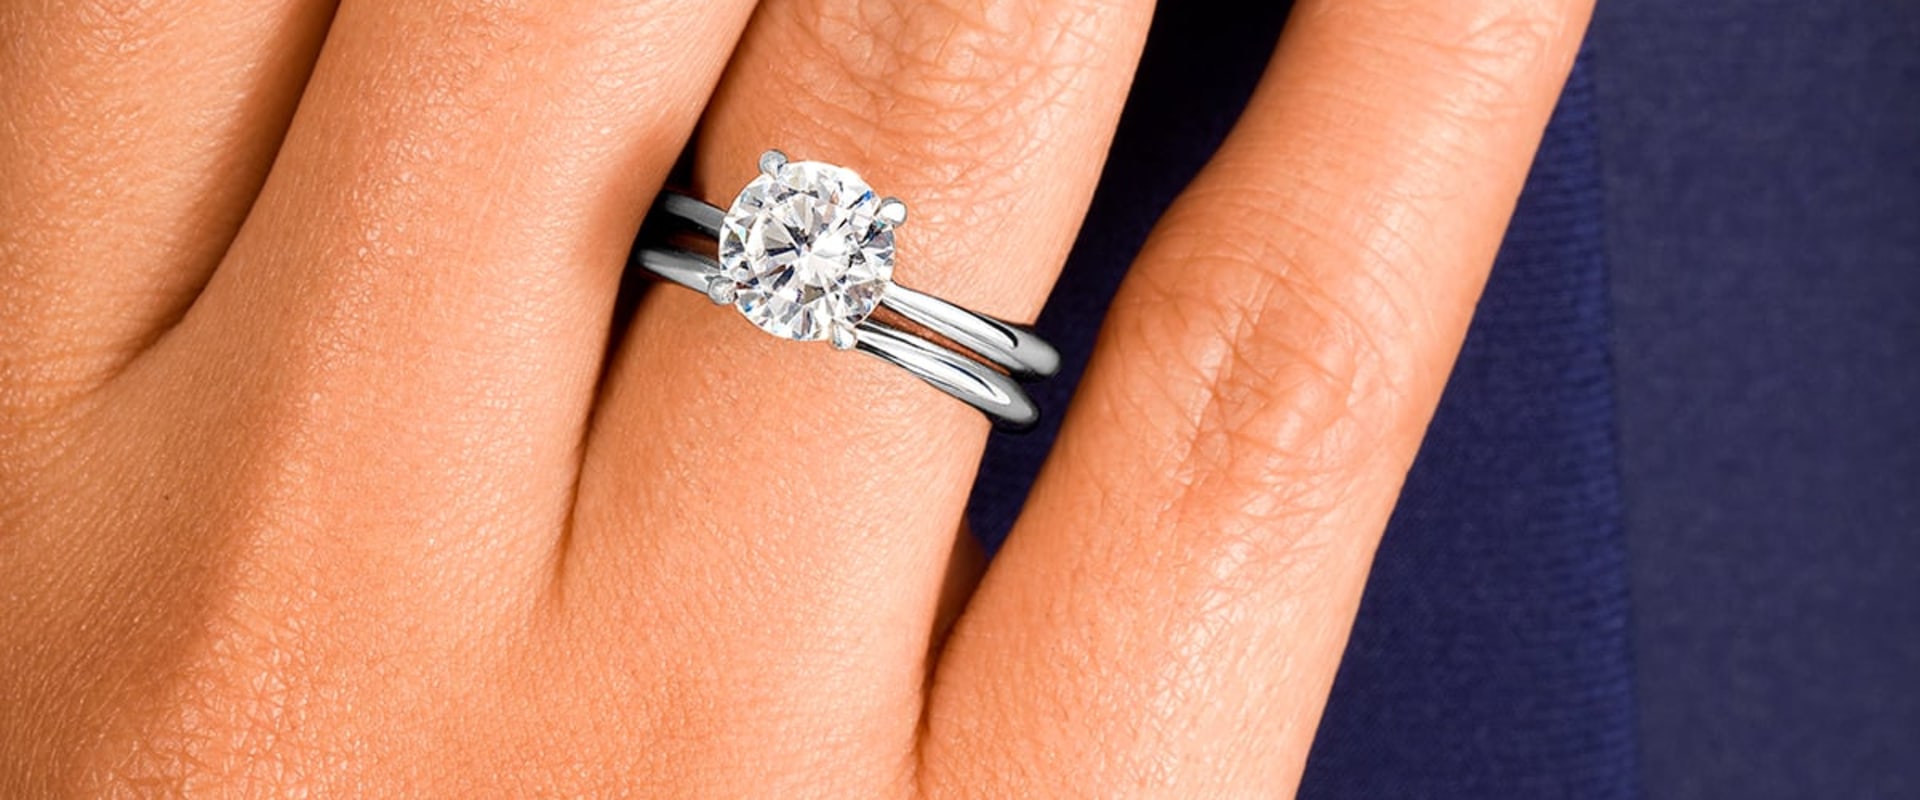 Platinum Wedding Rings: A Comprehensive Overview